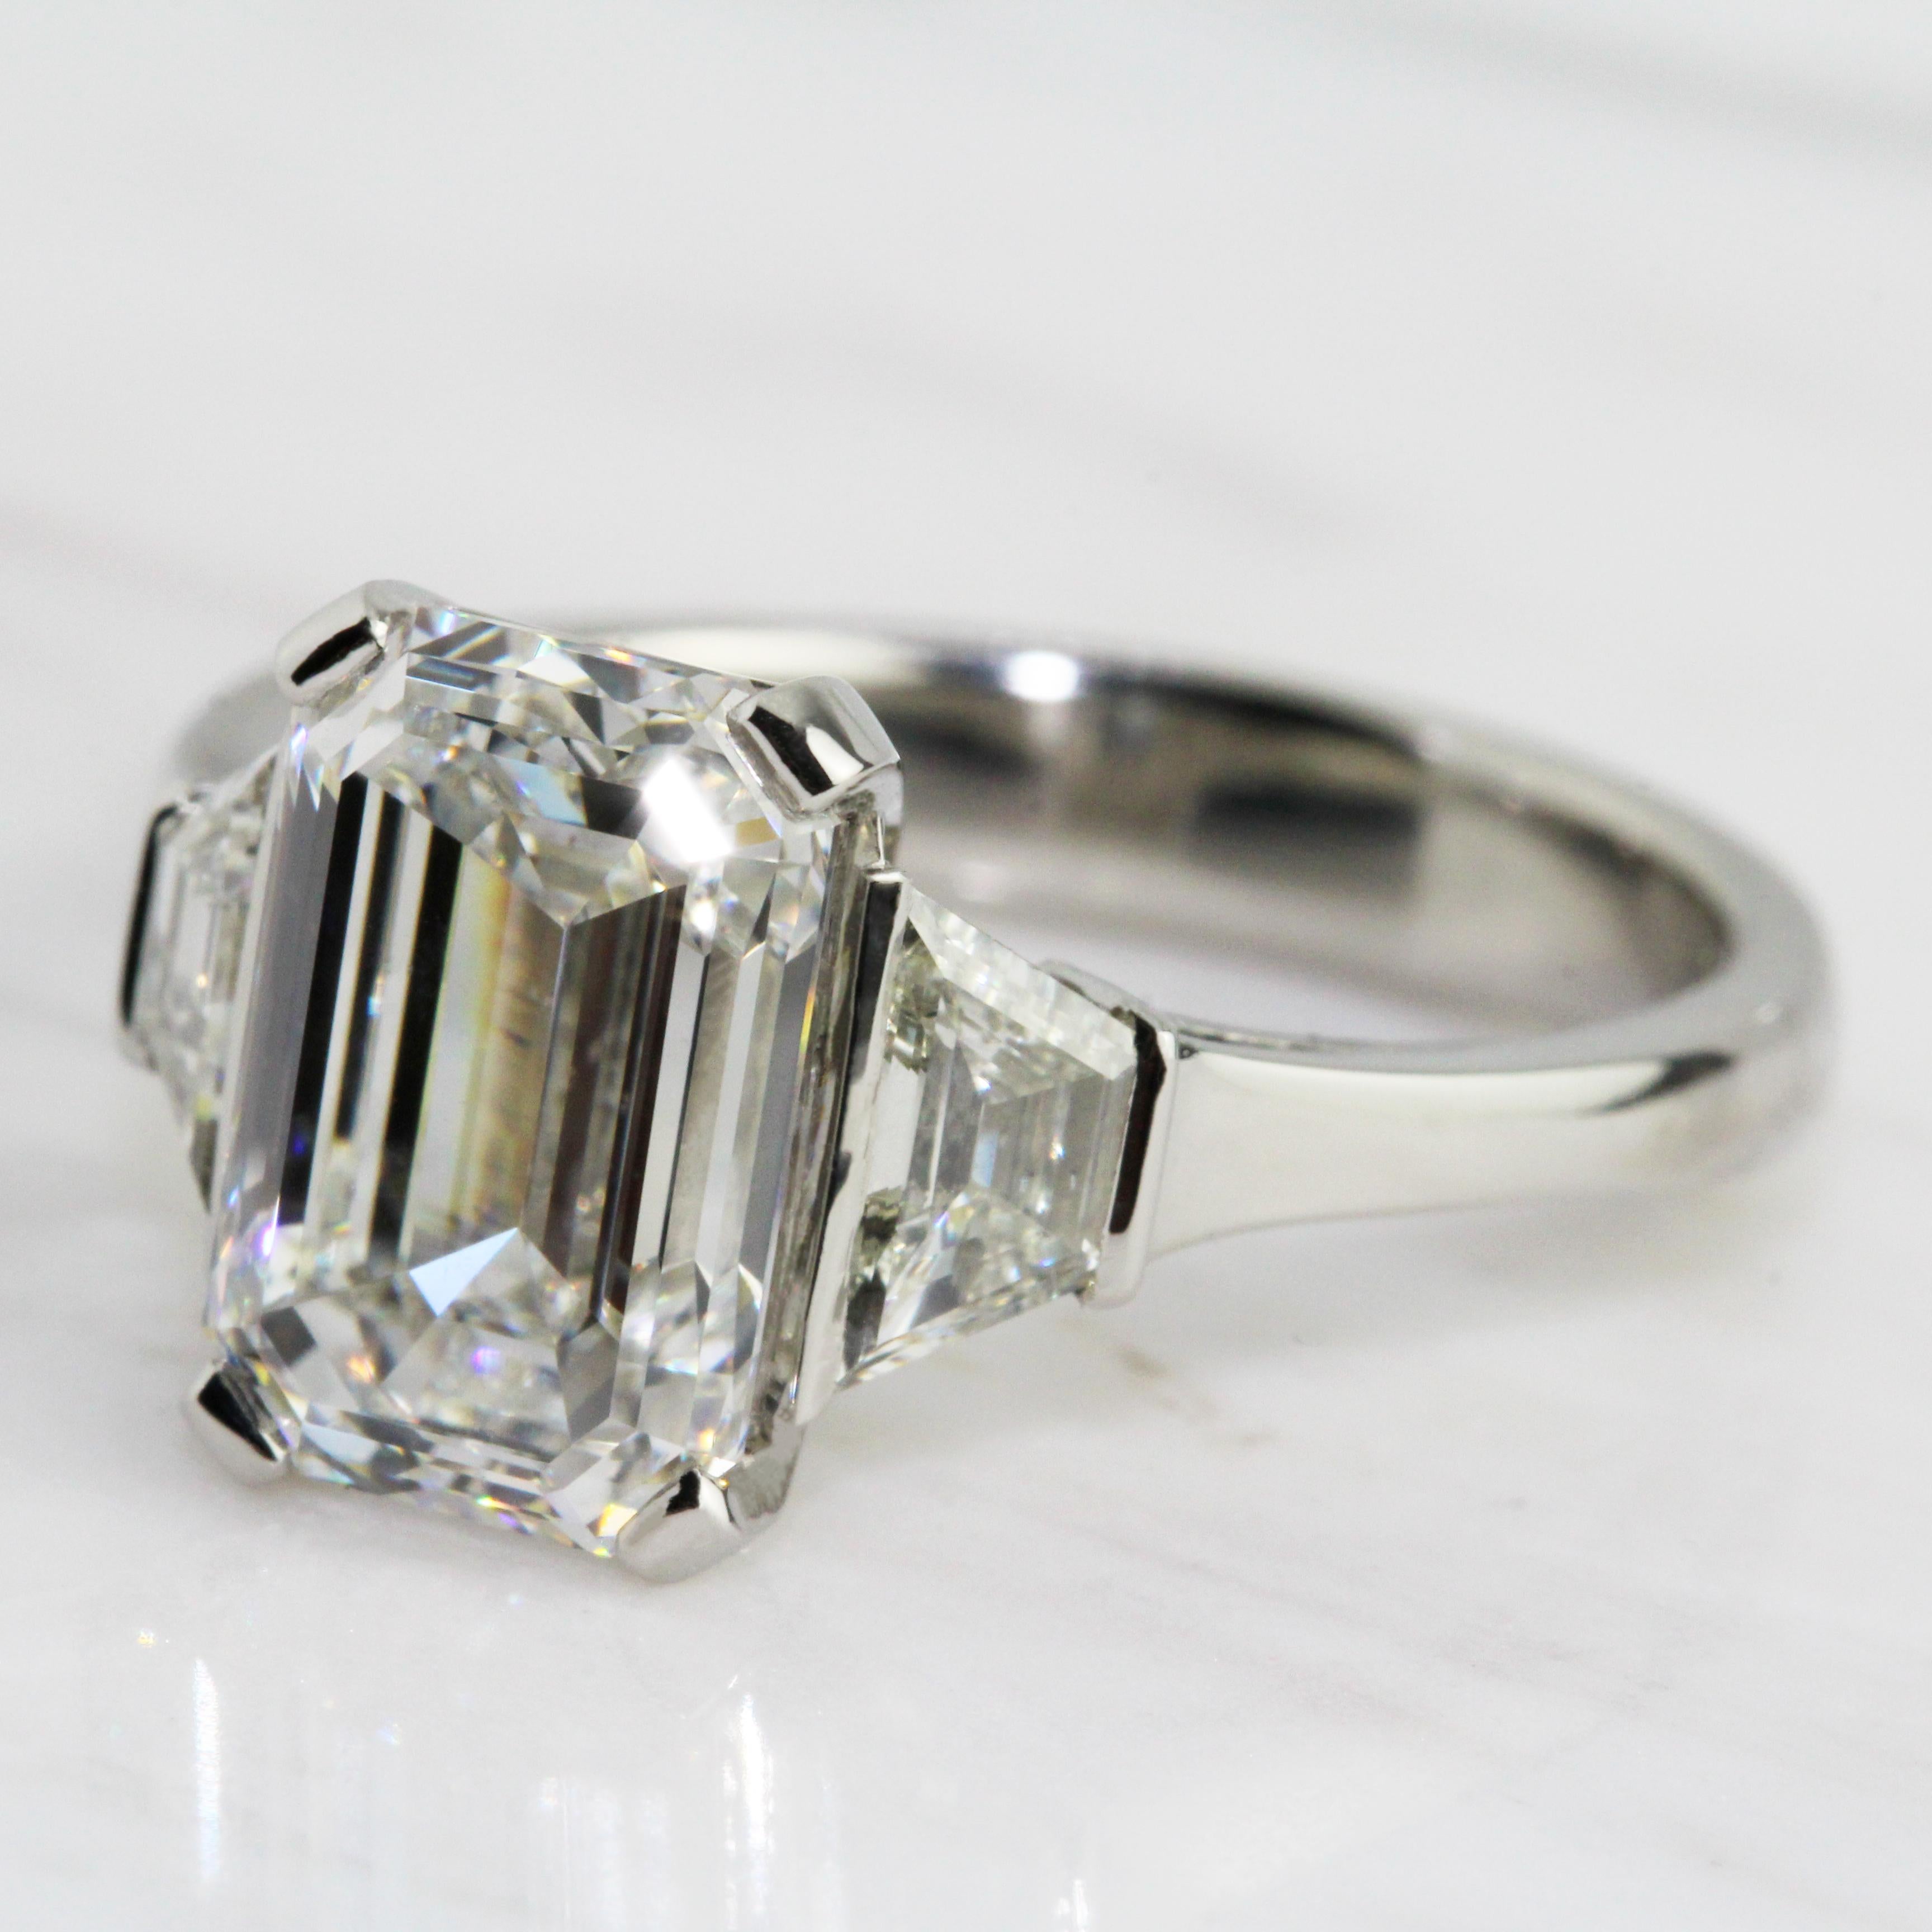 A magnificent diamond ring by Ronan Campbell, words do not do this piece justice, it is a piece which has to be tried on to fully appreciate. A breathtaking emerald cut diamond (3.15ct E Colour SI1 Clarity GIA) is matched perfectly by two custom cut